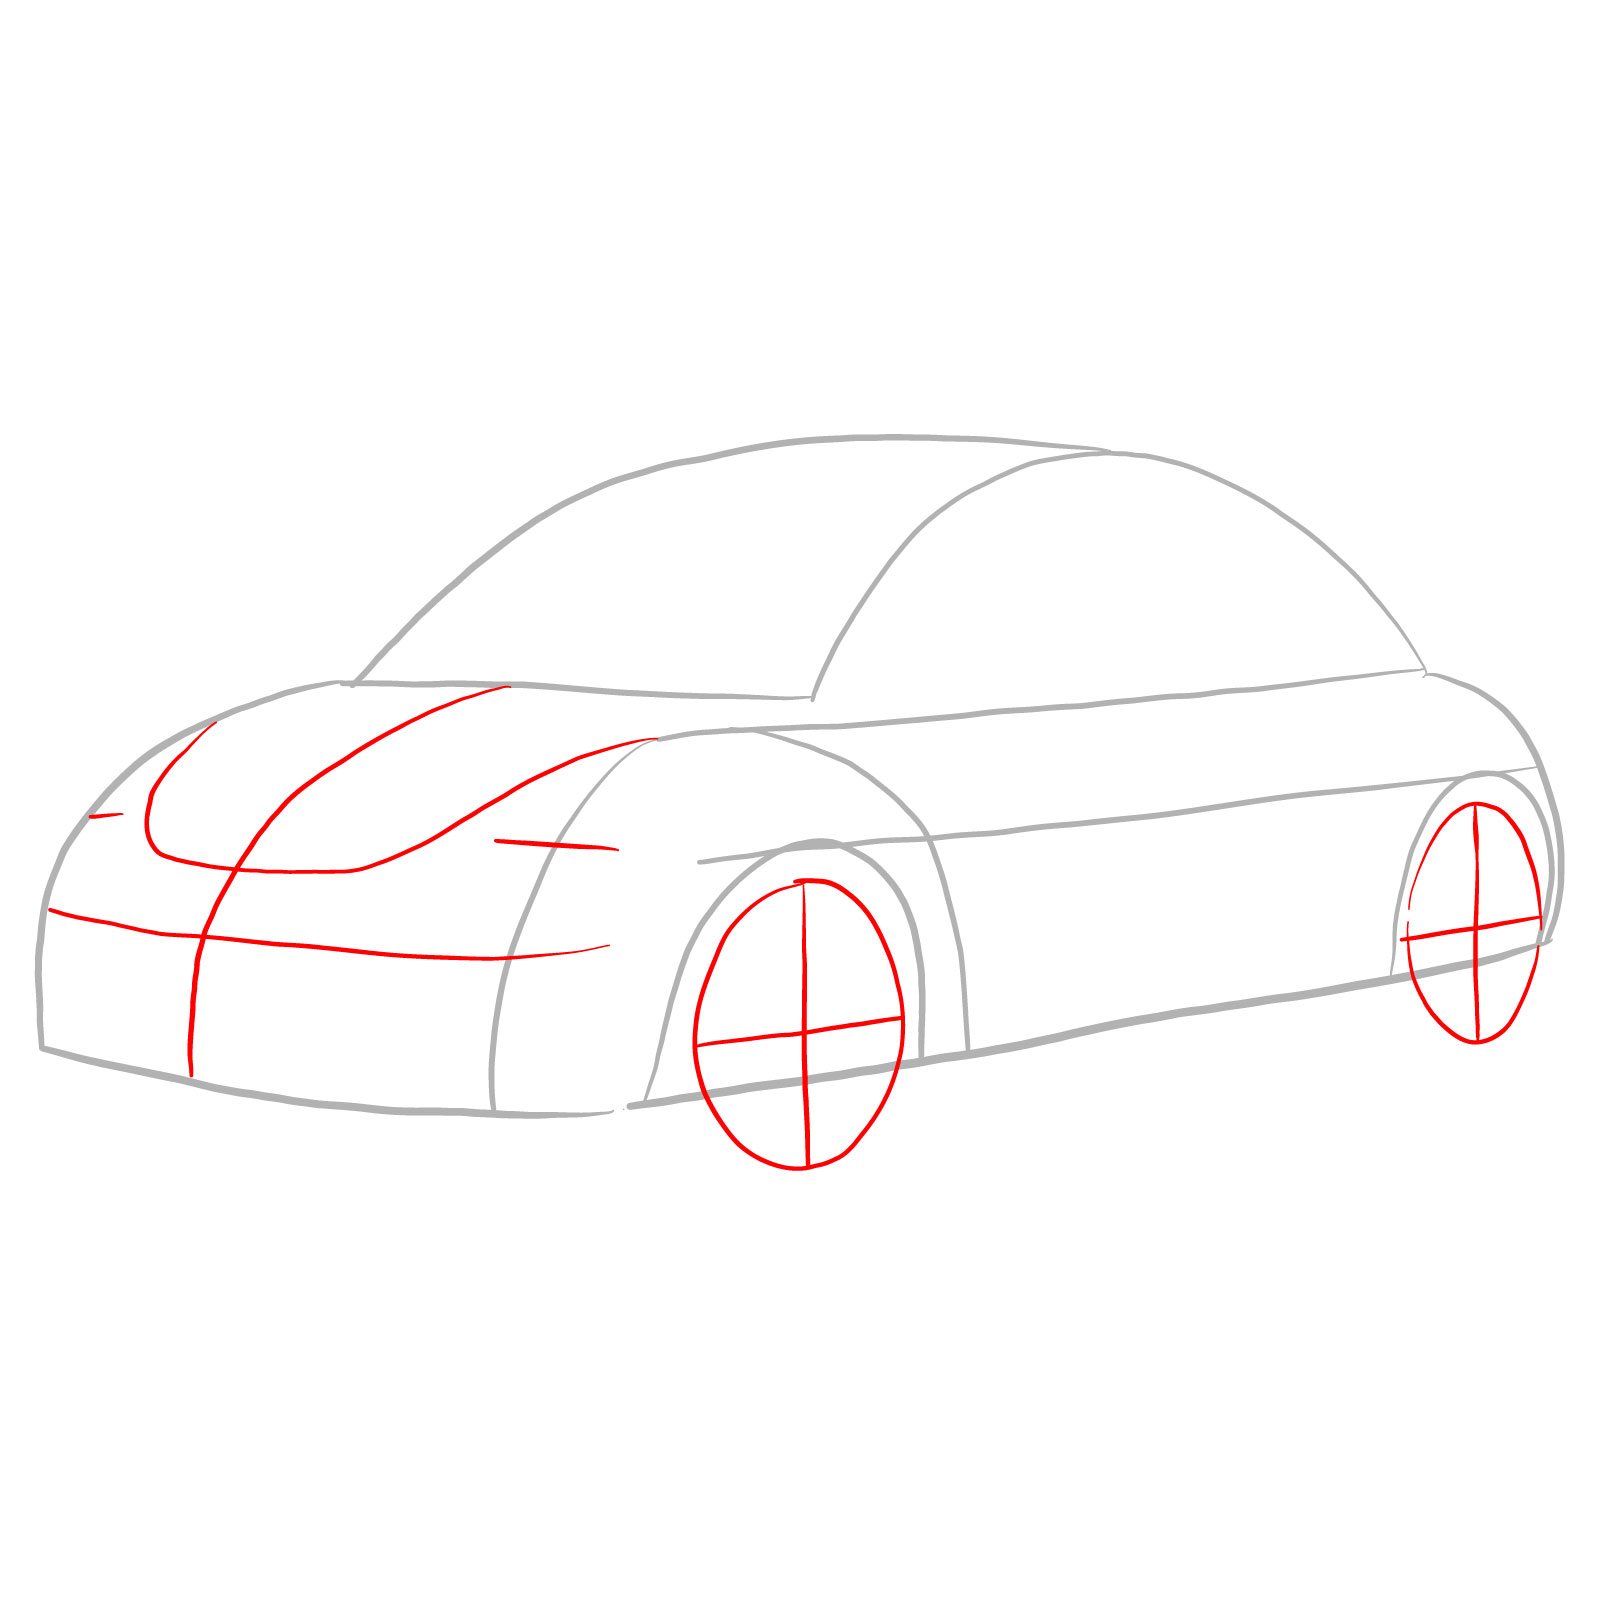 How to draw Volkswagen New Beetle - step 03